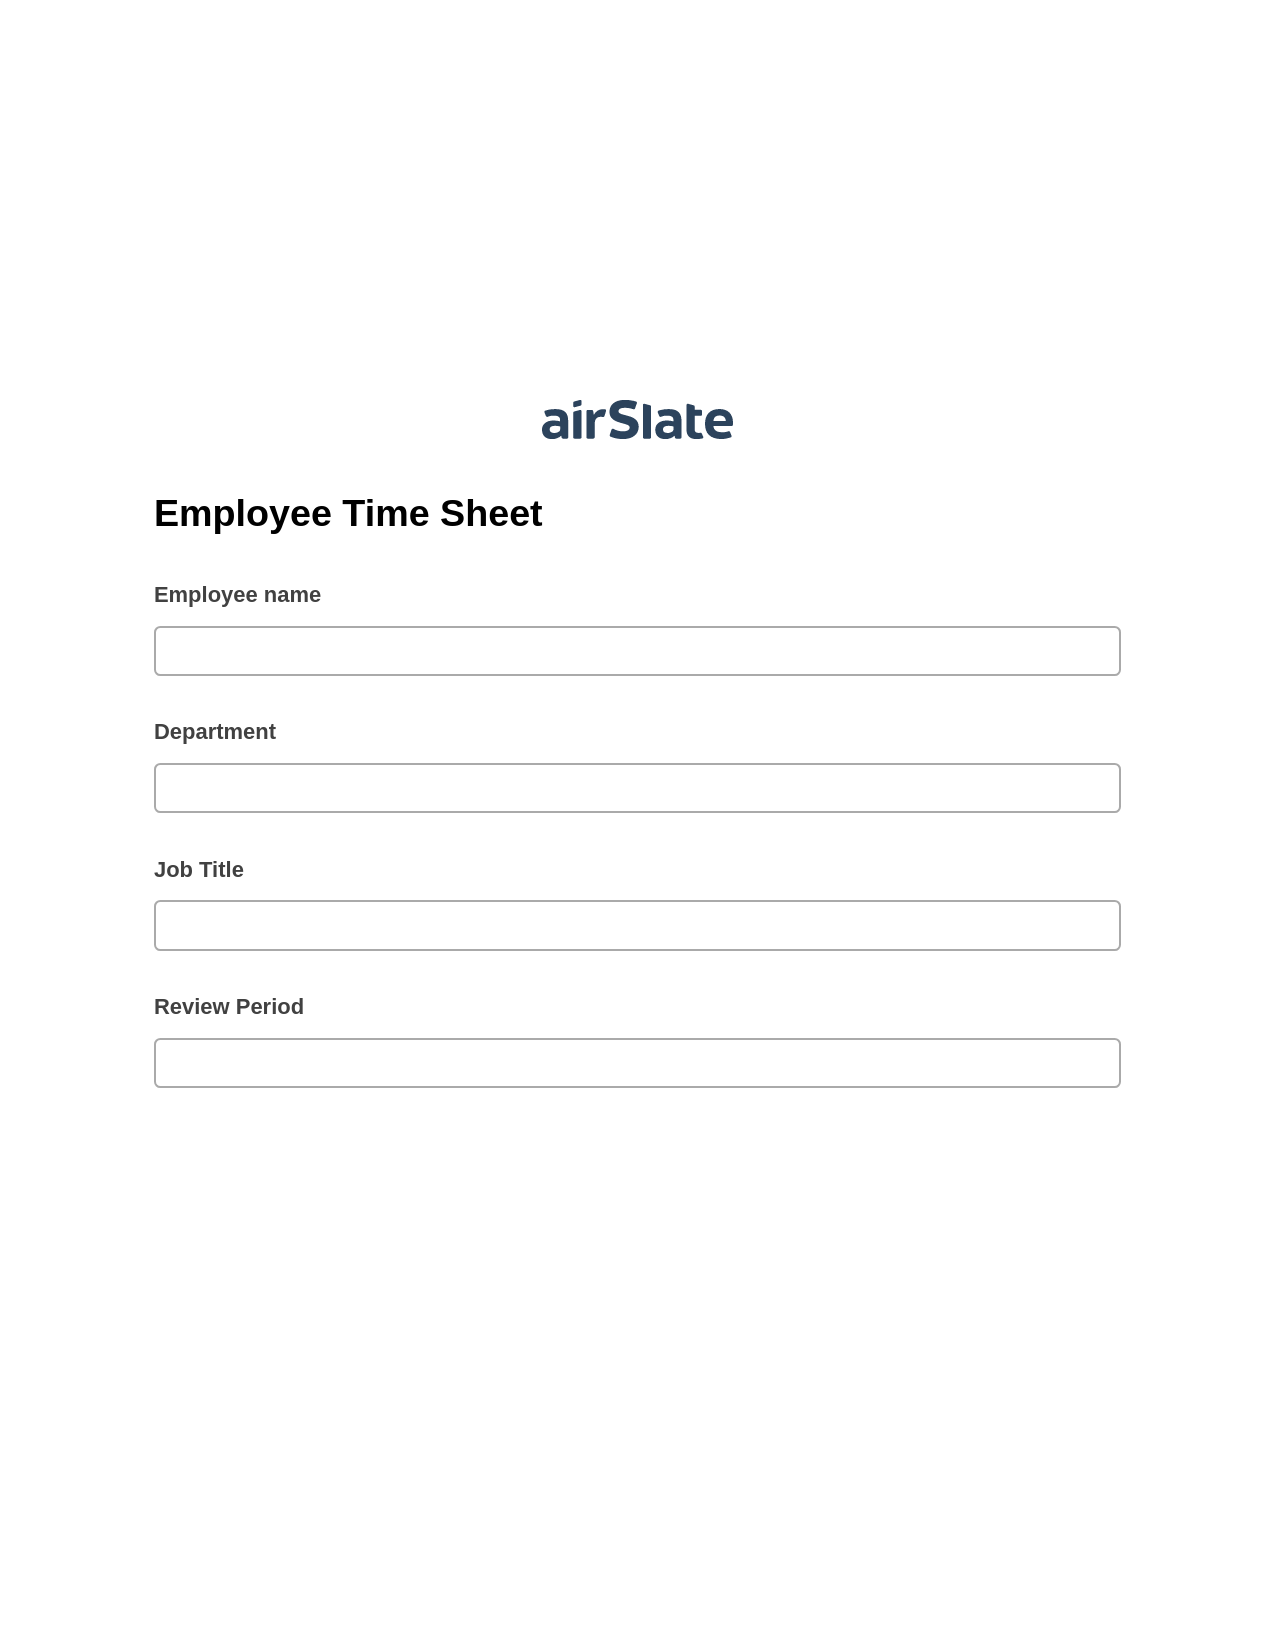 Multirole Employee Time Sheet Pre-fill from Office 365 Excel Bot, Invoke Salesforce Process Bot, Post-finish Document Bot